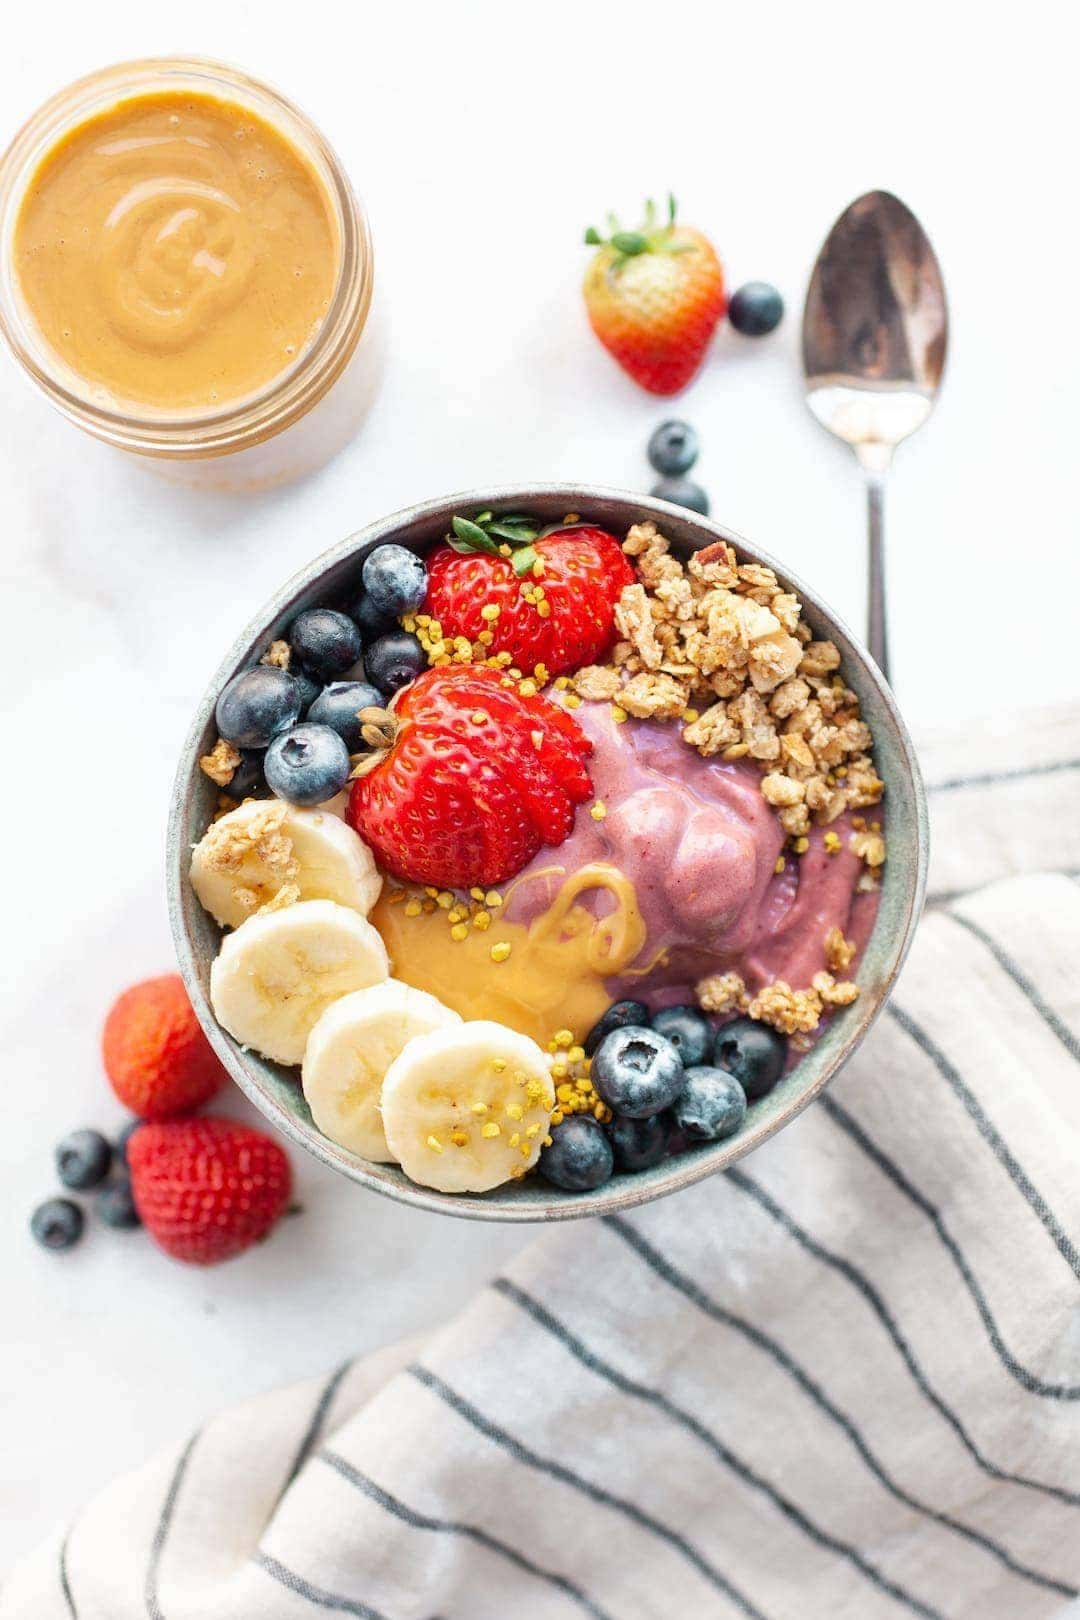 peanut butter acai bowl topped with berries, banana, and bee pollen